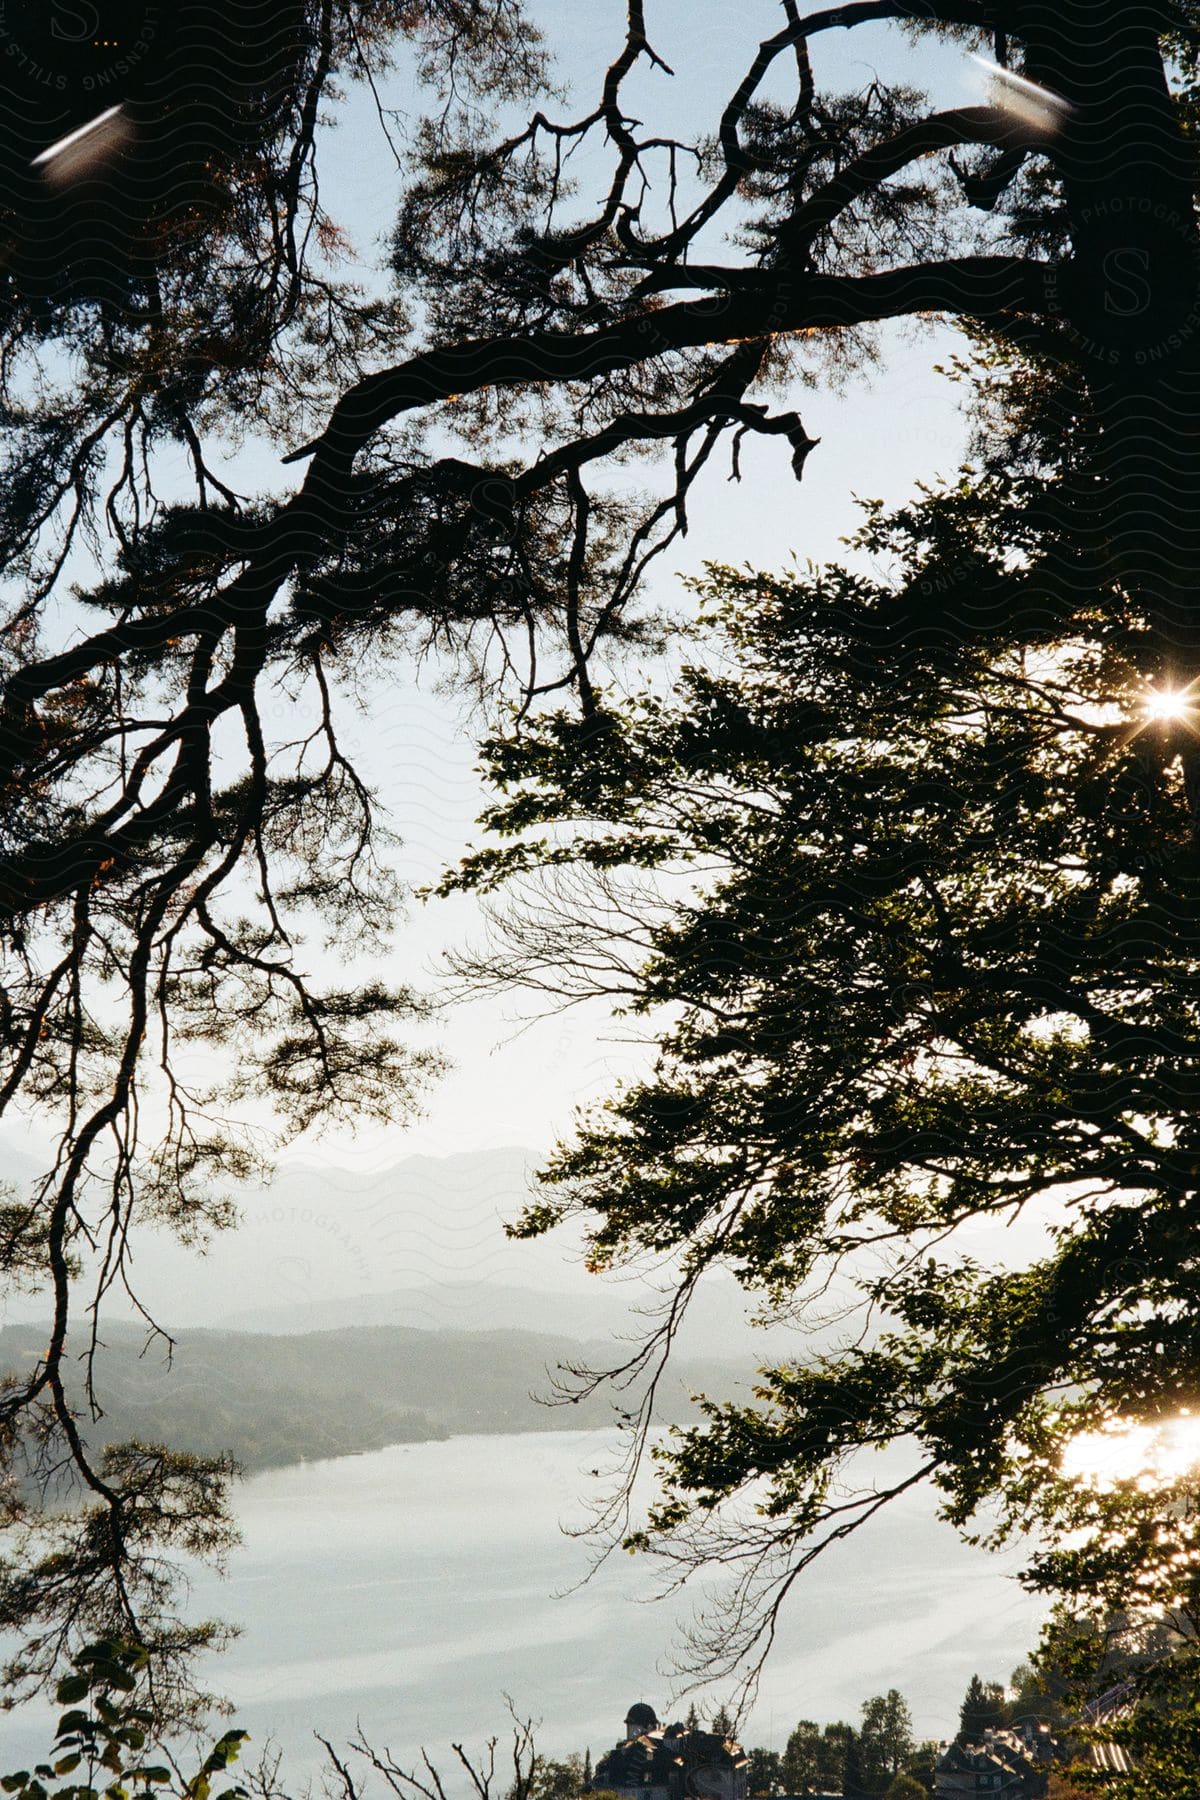 Sunrise through the silhouette of trees overlooking a mountainous lakeside landscape.